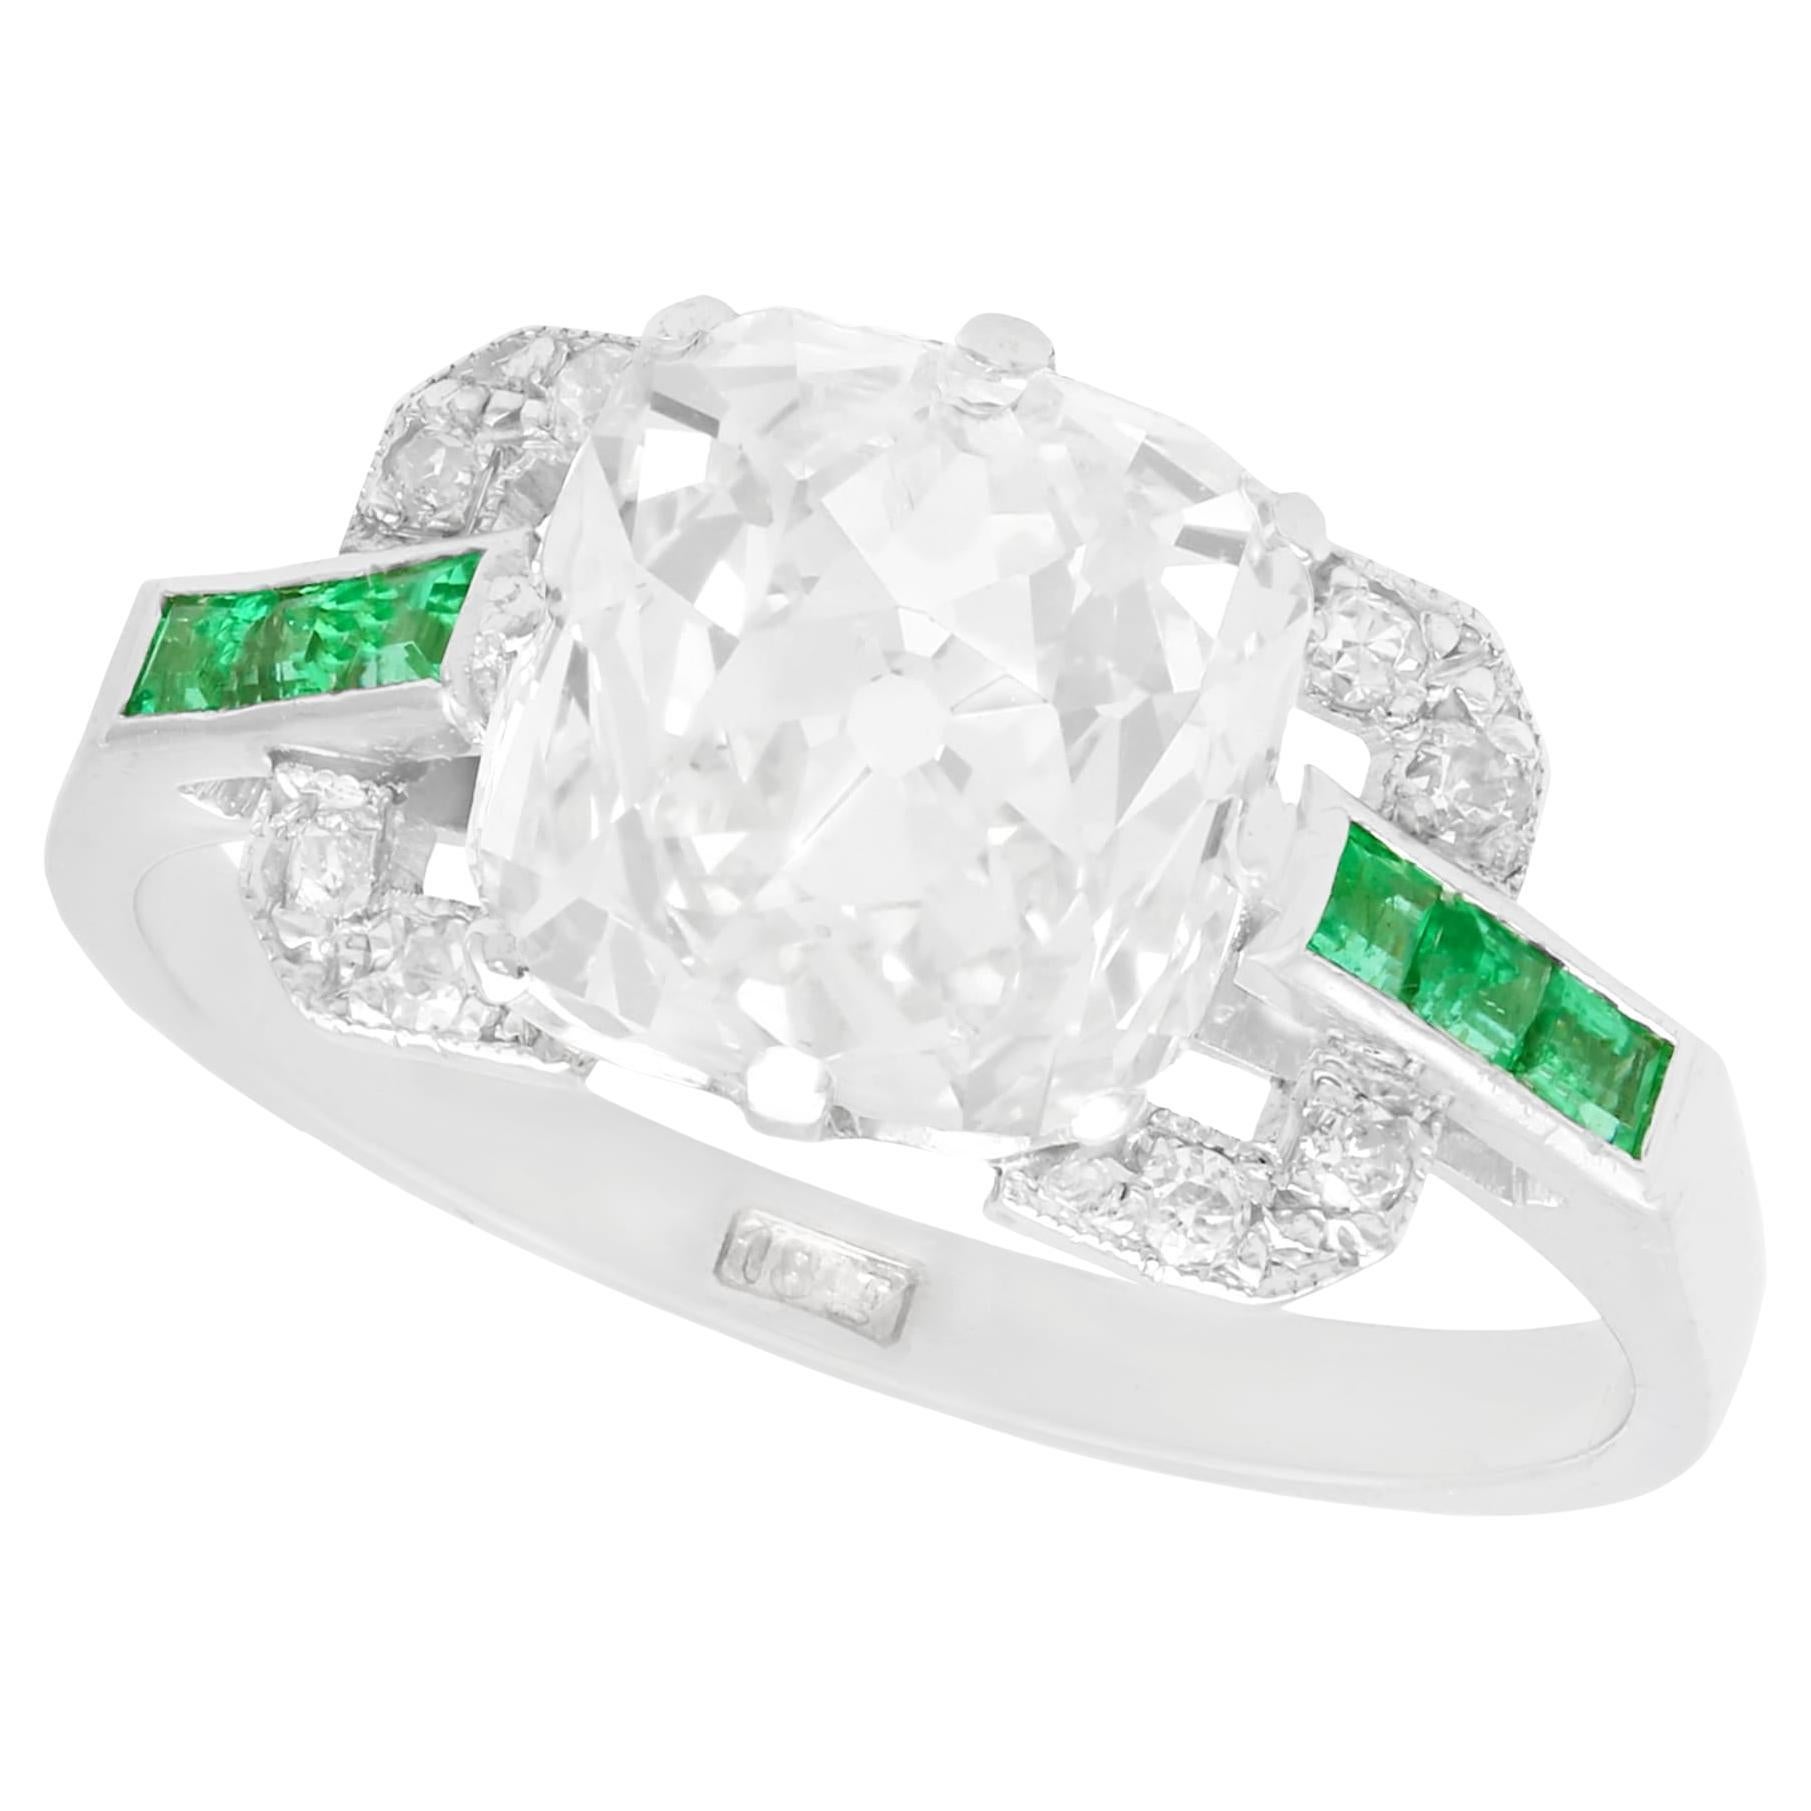 1930s Antique 4.42 Carat Diamond and Emerald White Gold Cocktail Ring For Sale